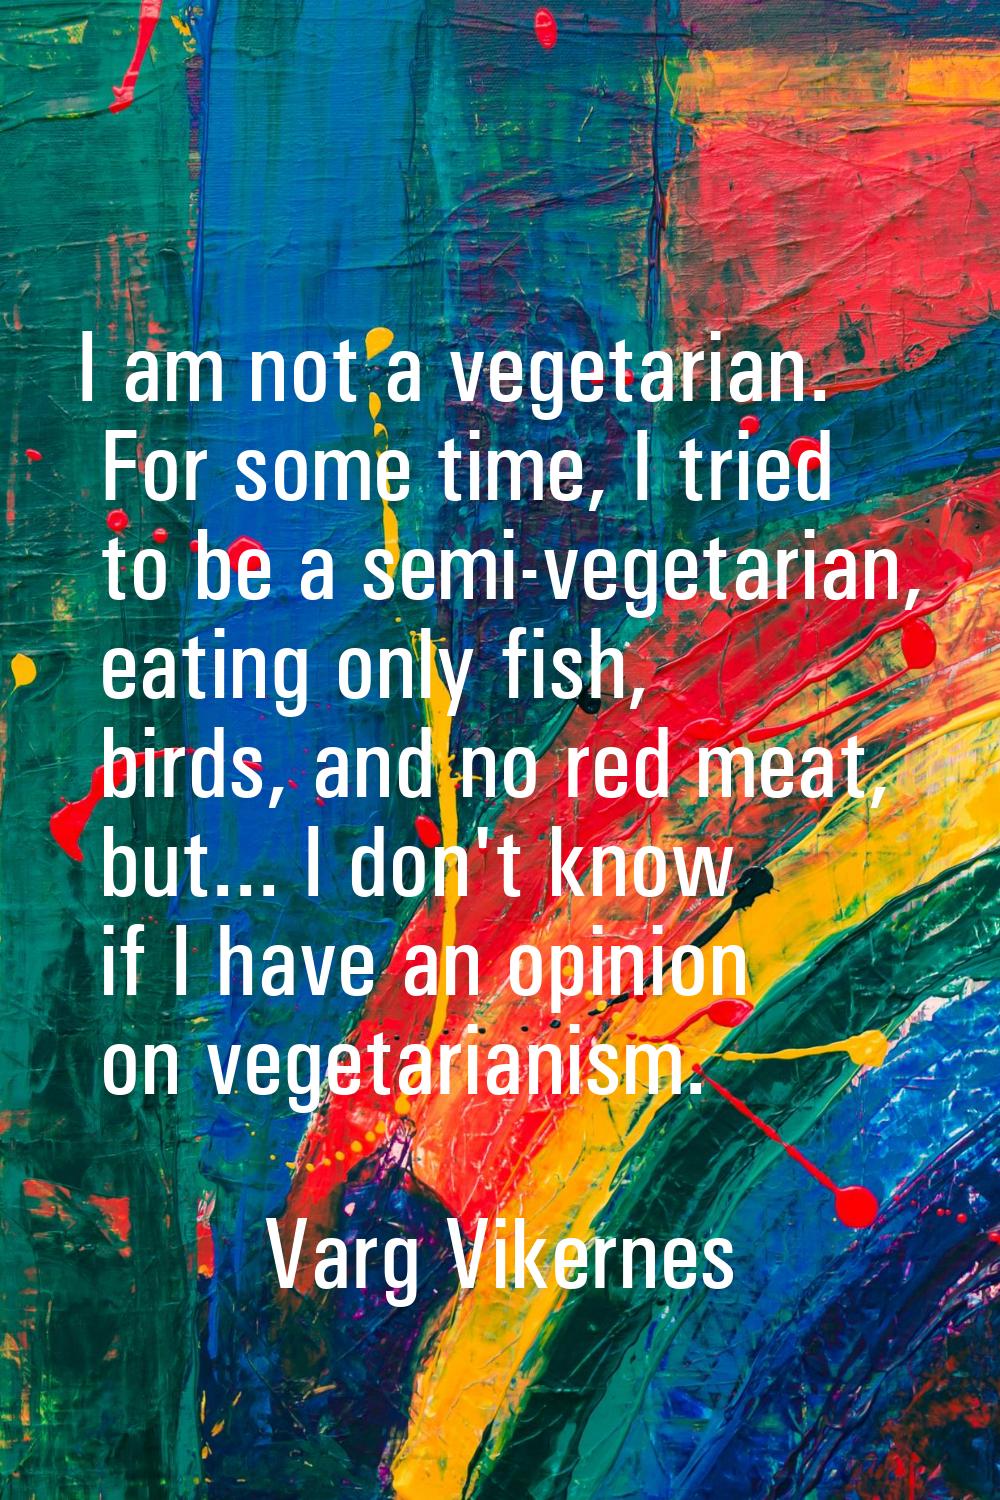 I am not a vegetarian. For some time, I tried to be a semi-vegetarian, eating only fish, birds, and